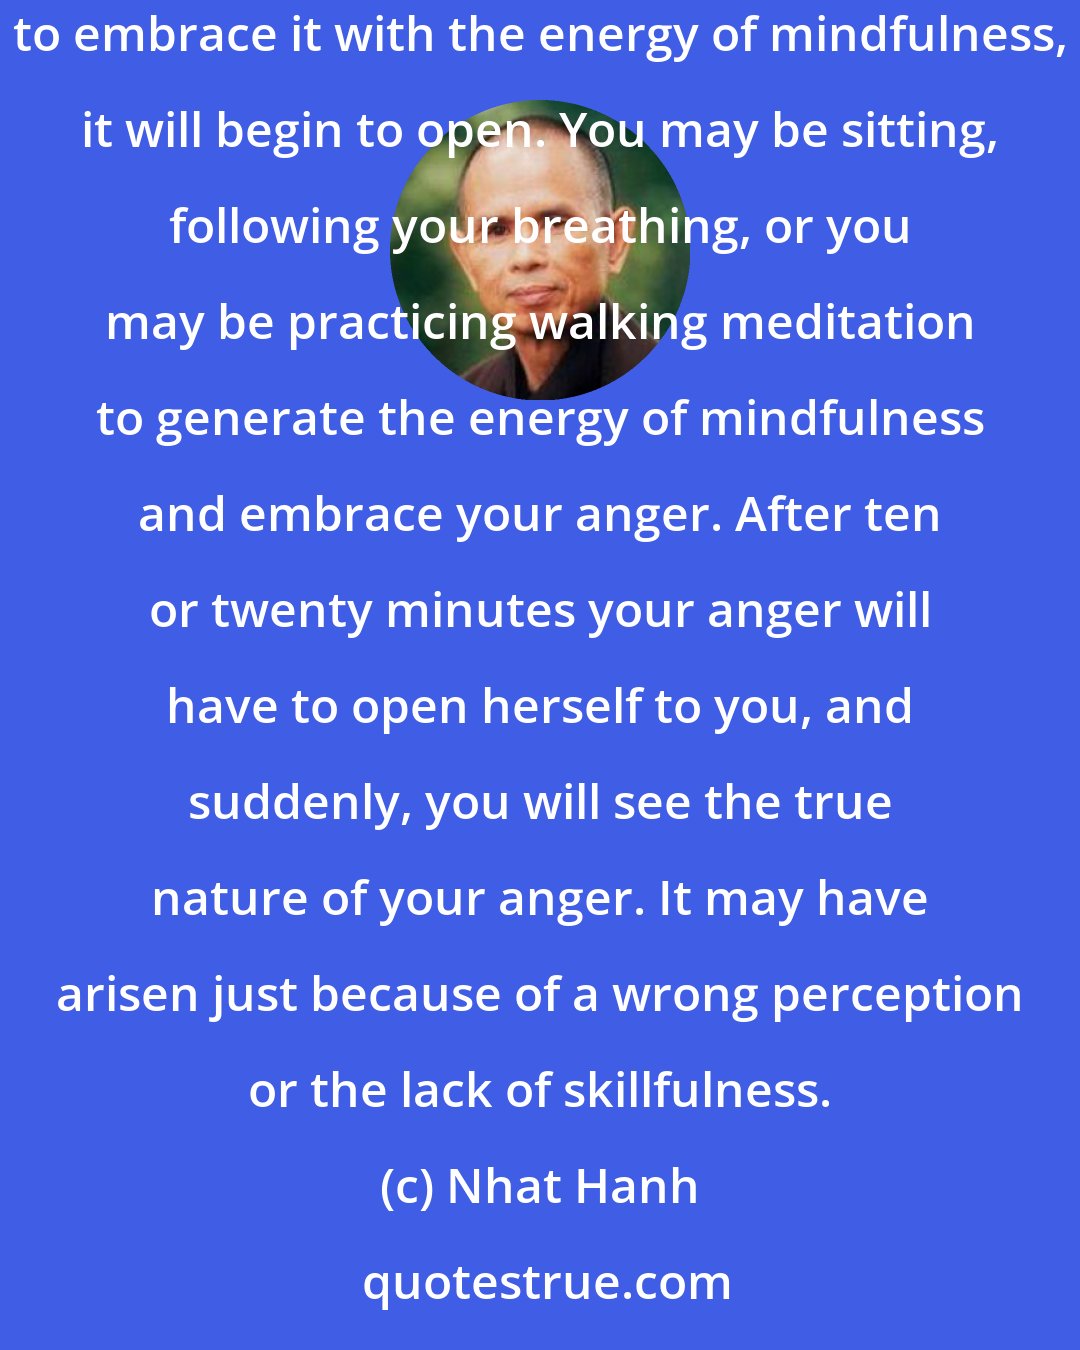 Nhat Hanh: Your anger is like a flower. In the beginning you may not understand the nature of your anger, or why it has come up. But if you know how to embrace it with the energy of mindfulness, it will begin to open. You may be sitting, following your breathing, or you may be practicing walking meditation to generate the energy of mindfulness and embrace your anger. After ten or twenty minutes your anger will have to open herself to you, and suddenly, you will see the true nature of your anger. It may have arisen just because of a wrong perception or the lack of skillfulness.